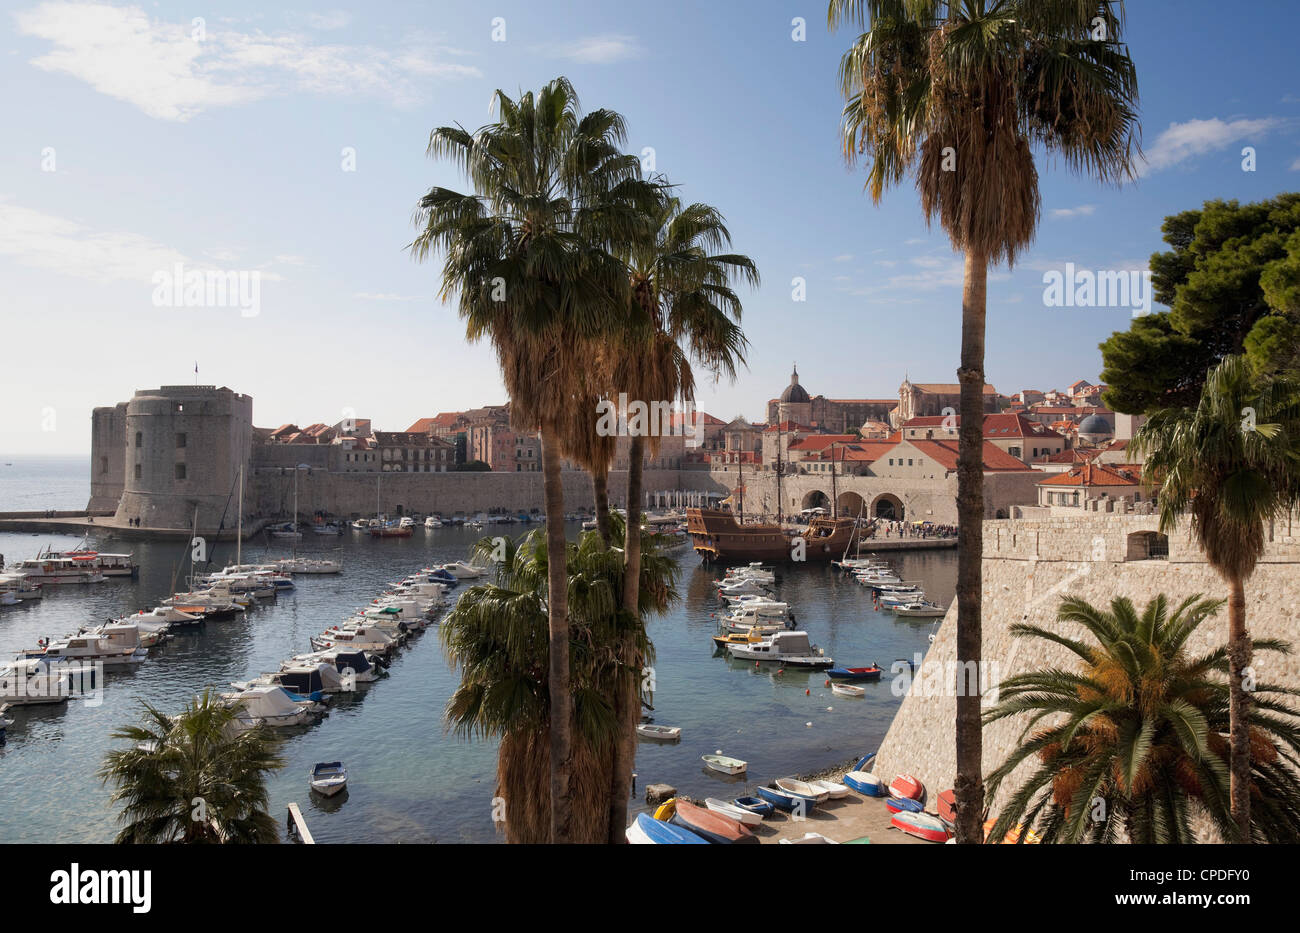 Palm trees and the harbour, Dubrovnik Old Town, Dubrovnik, Croatia, Europe Stock Photo